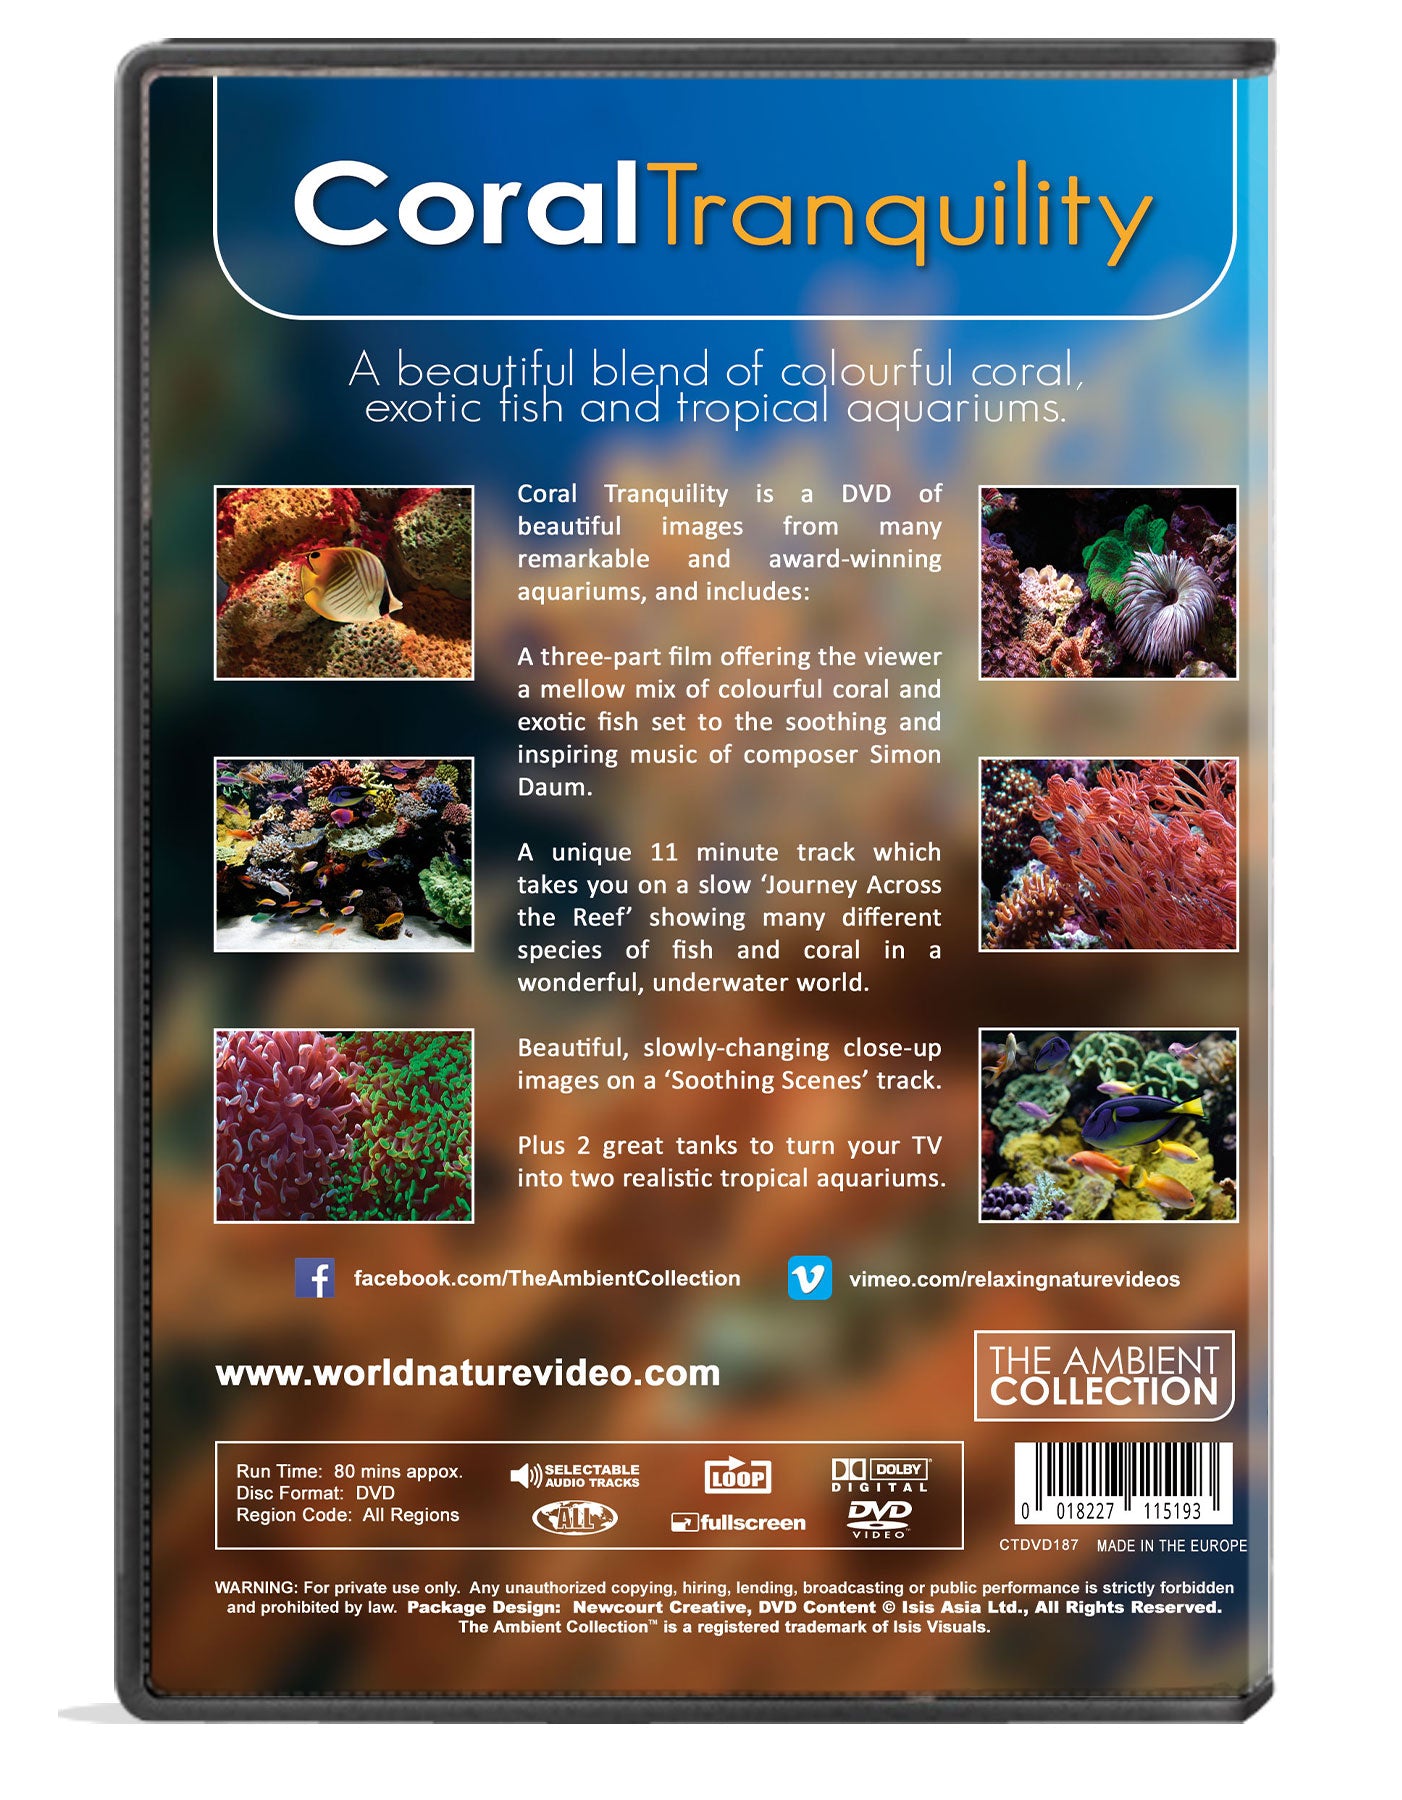 Coral Tranquility 2013 – The Ambient Collections Dvds